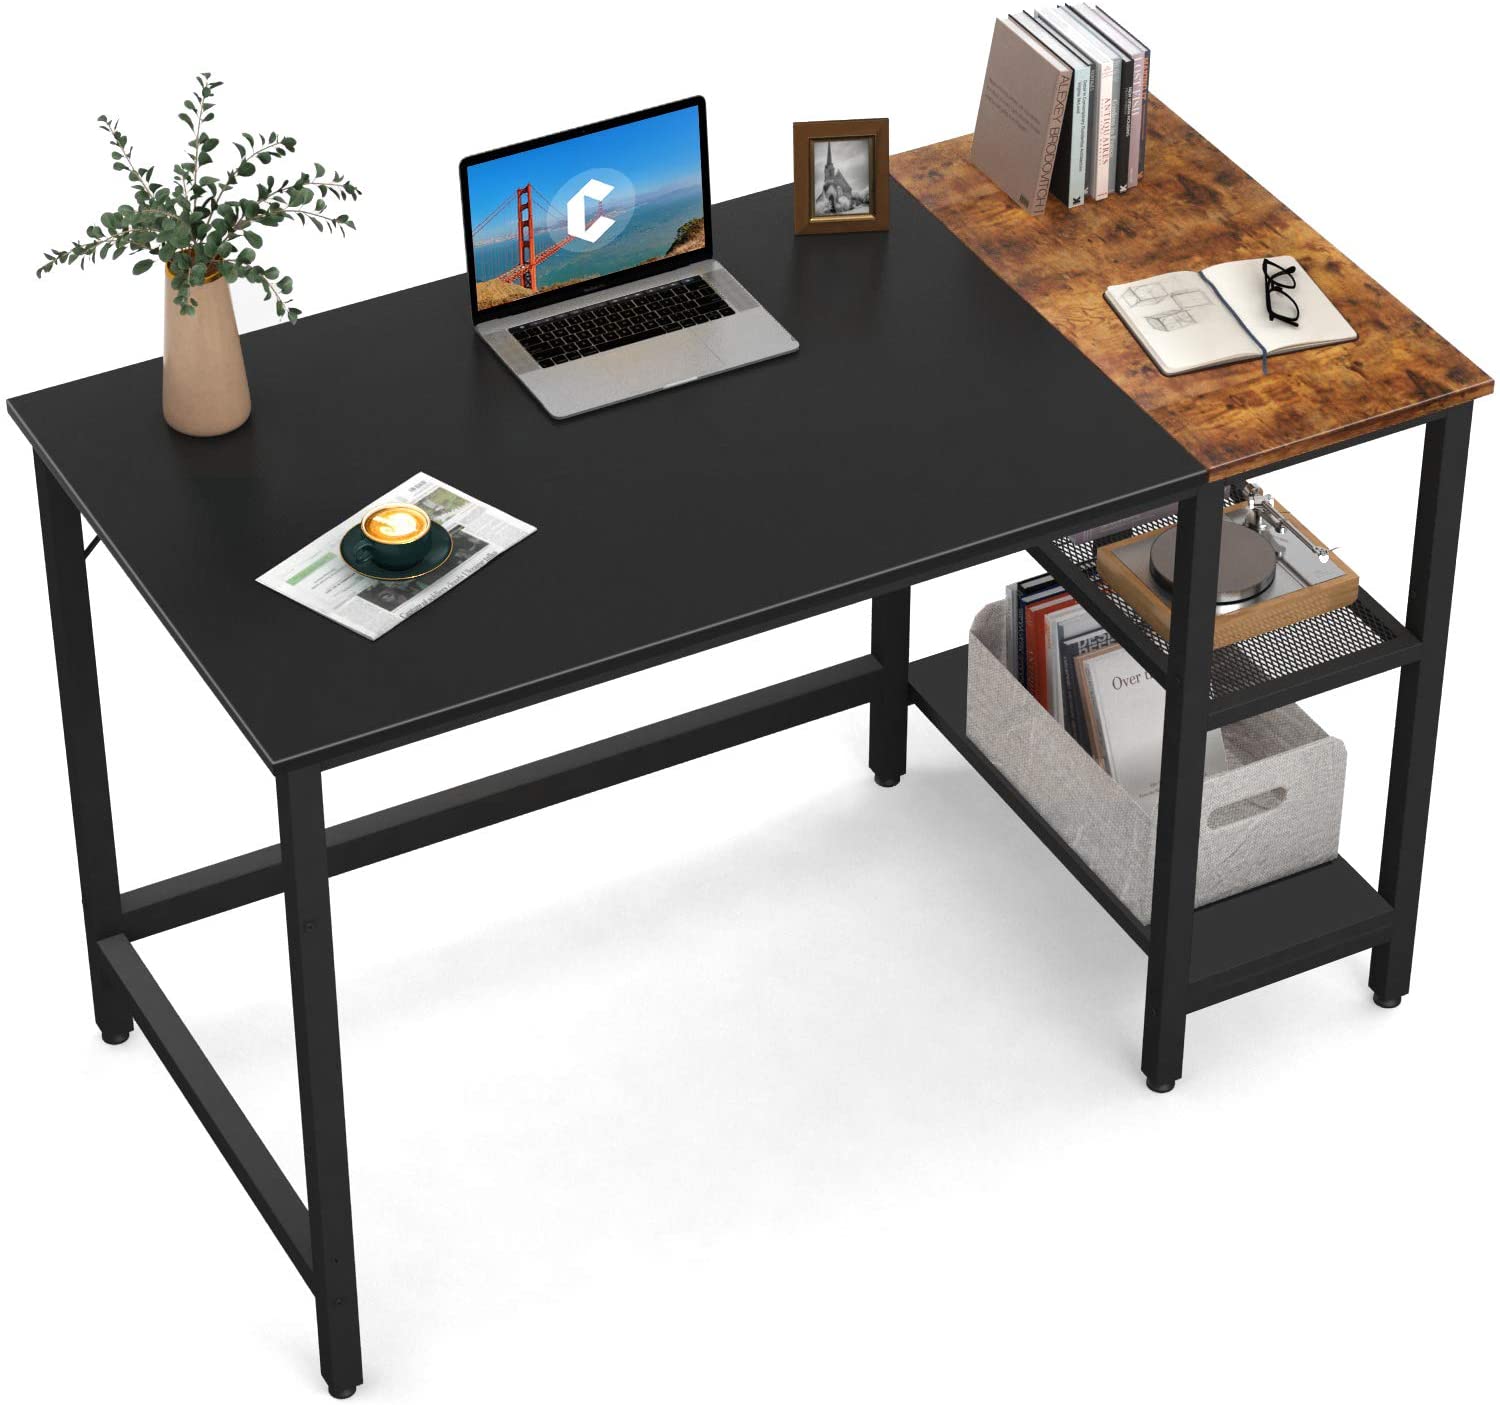 DlandHome 47 inches Computer Desk Office Table Activity Table Writing Desk Study Table Folding Table with Storage Layer Computer Workstation for Home Office Teak DND-ND7-120TB